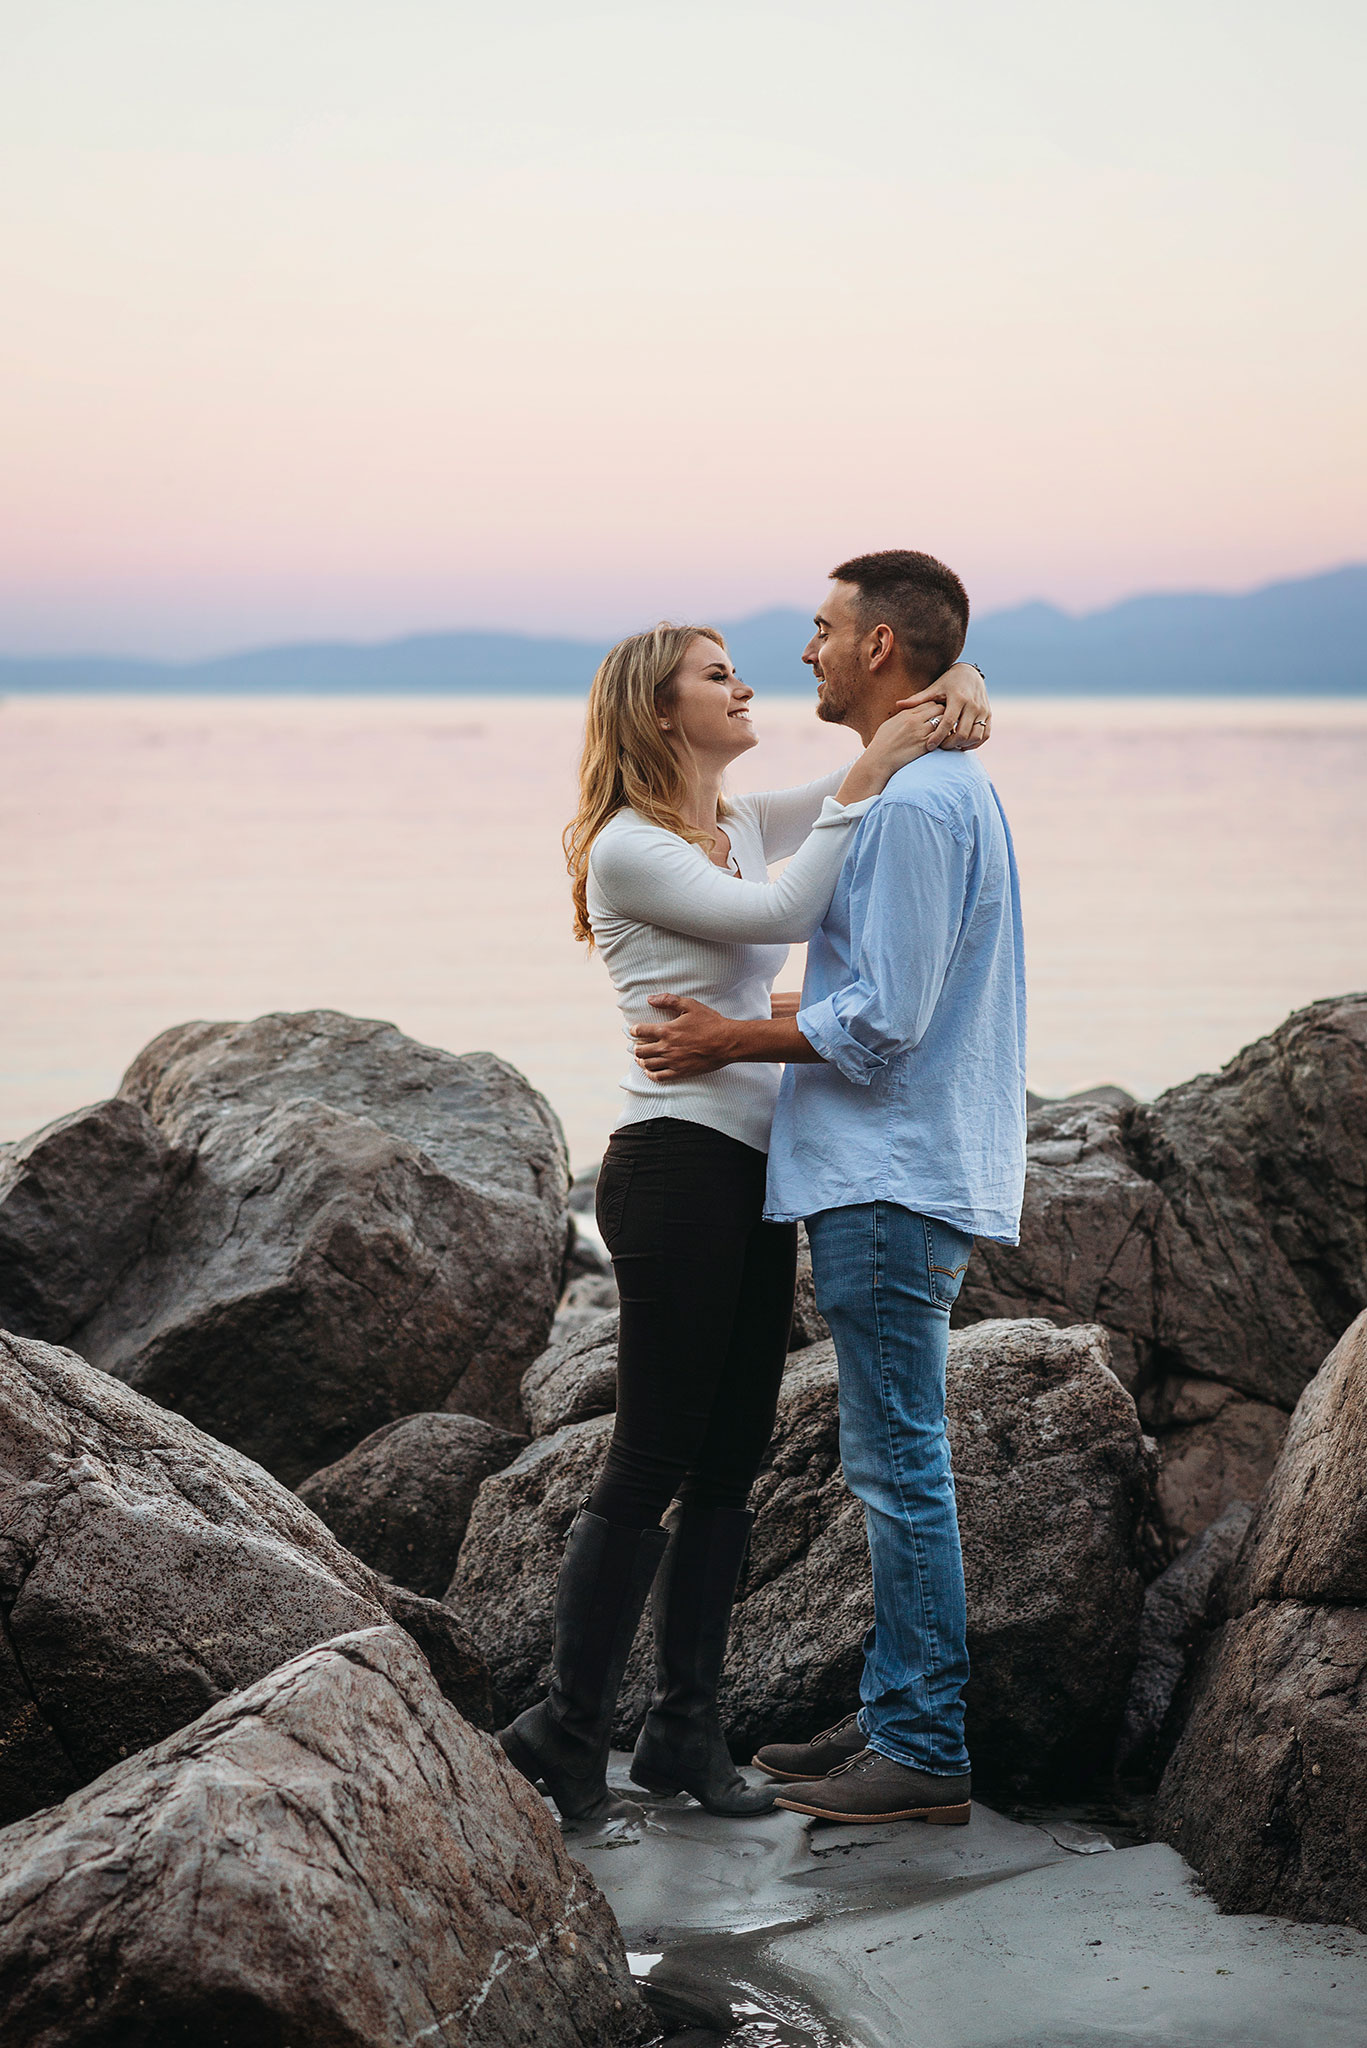 Sunset beach engagement session at East Sooke Park near Victoria, BC.